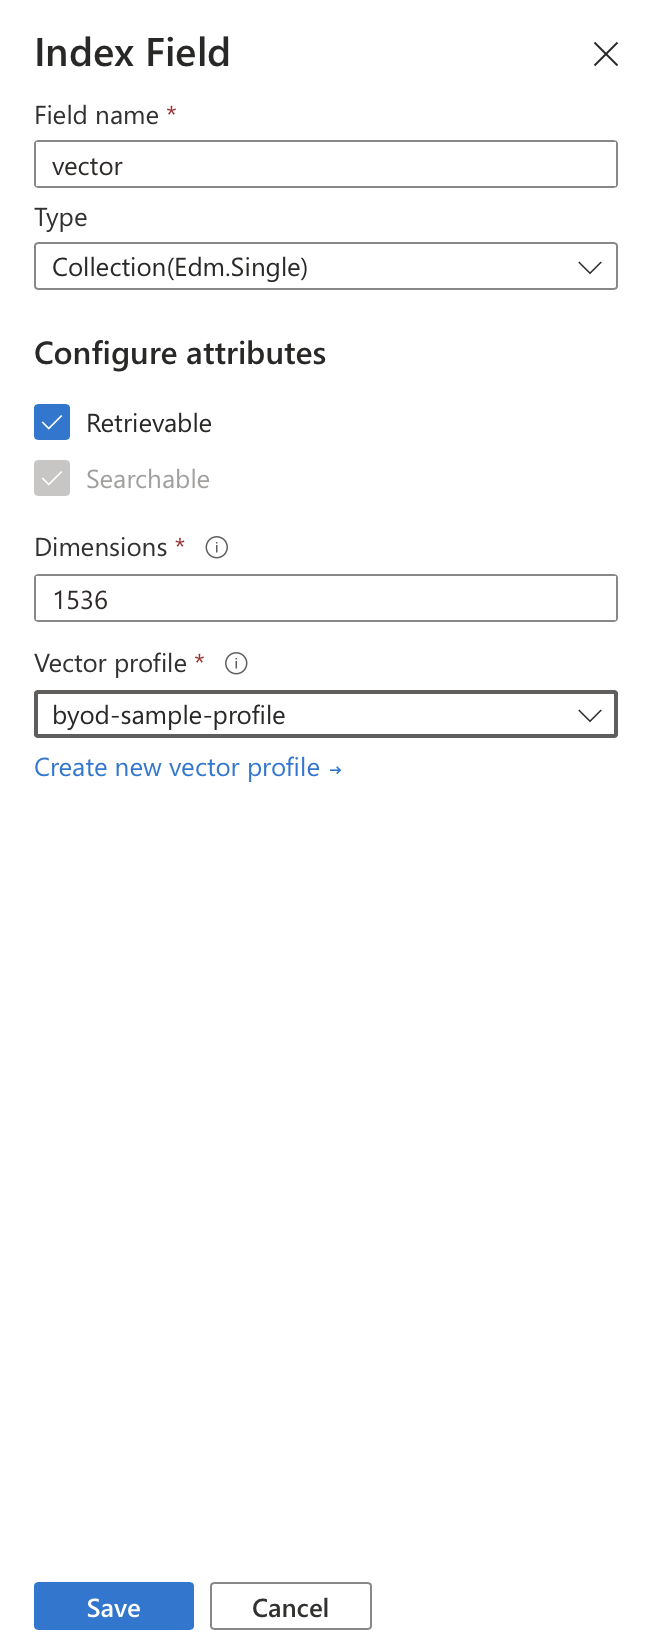 Assigning a vector profile to a field in Azure AI Search